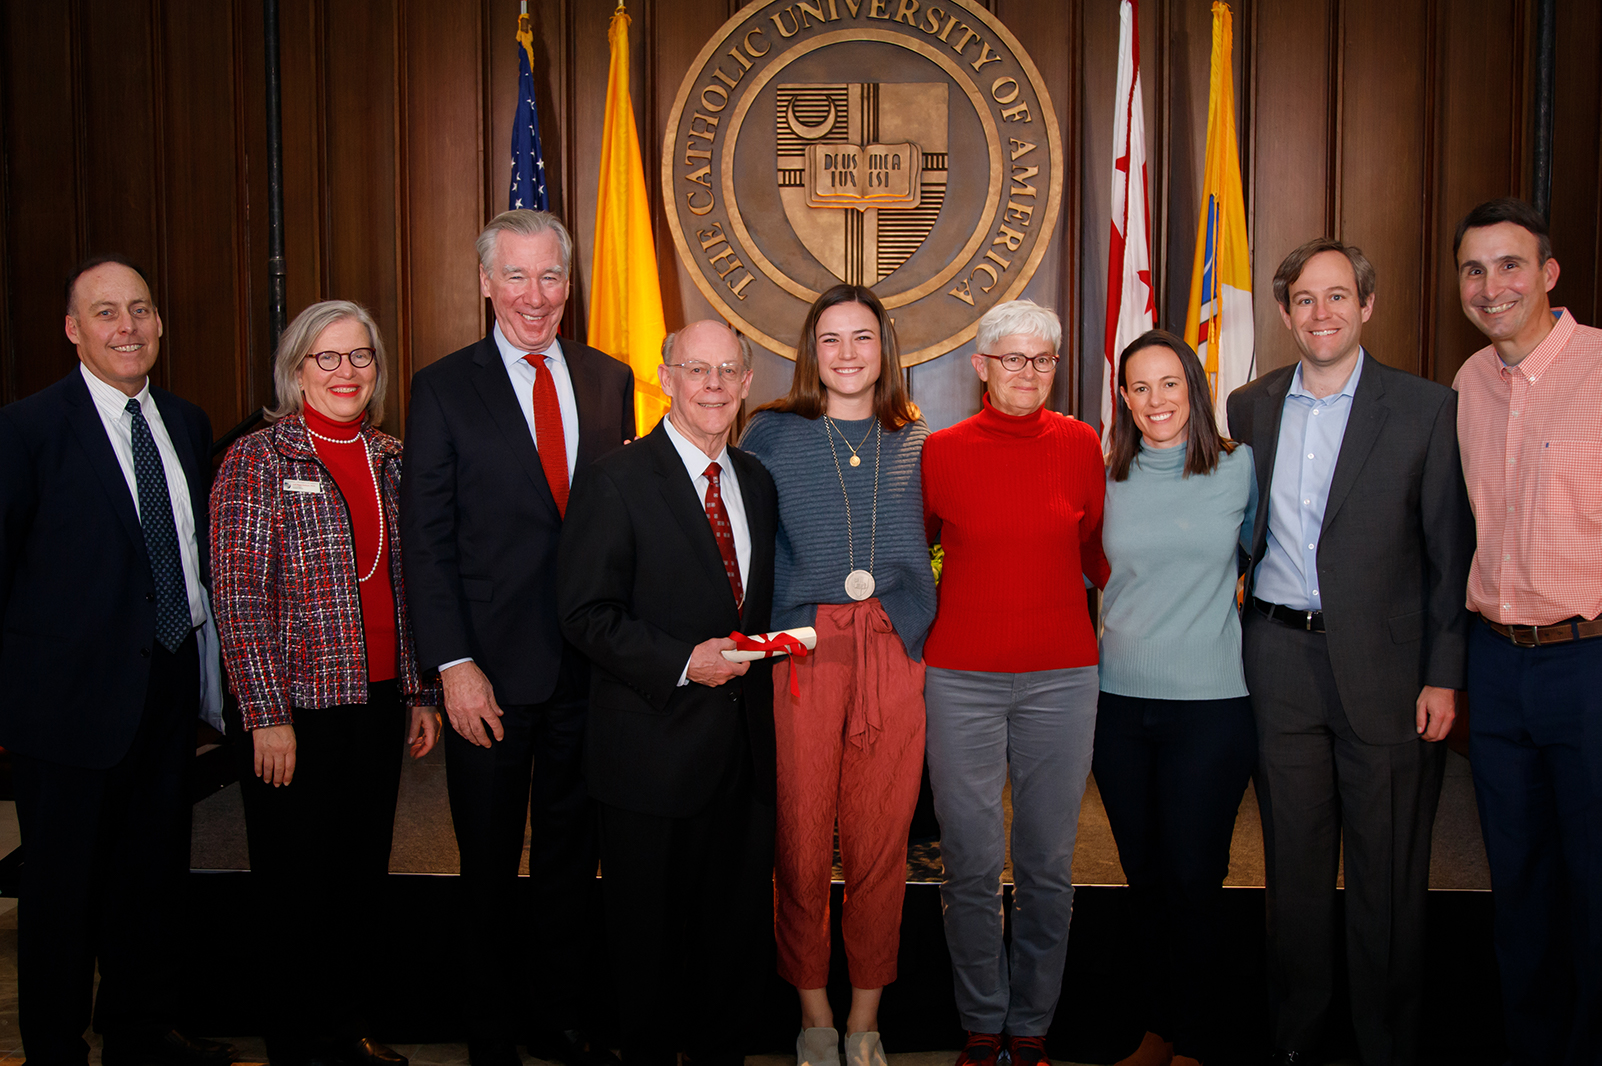 Bridget Power with the Roberts family and University leaders